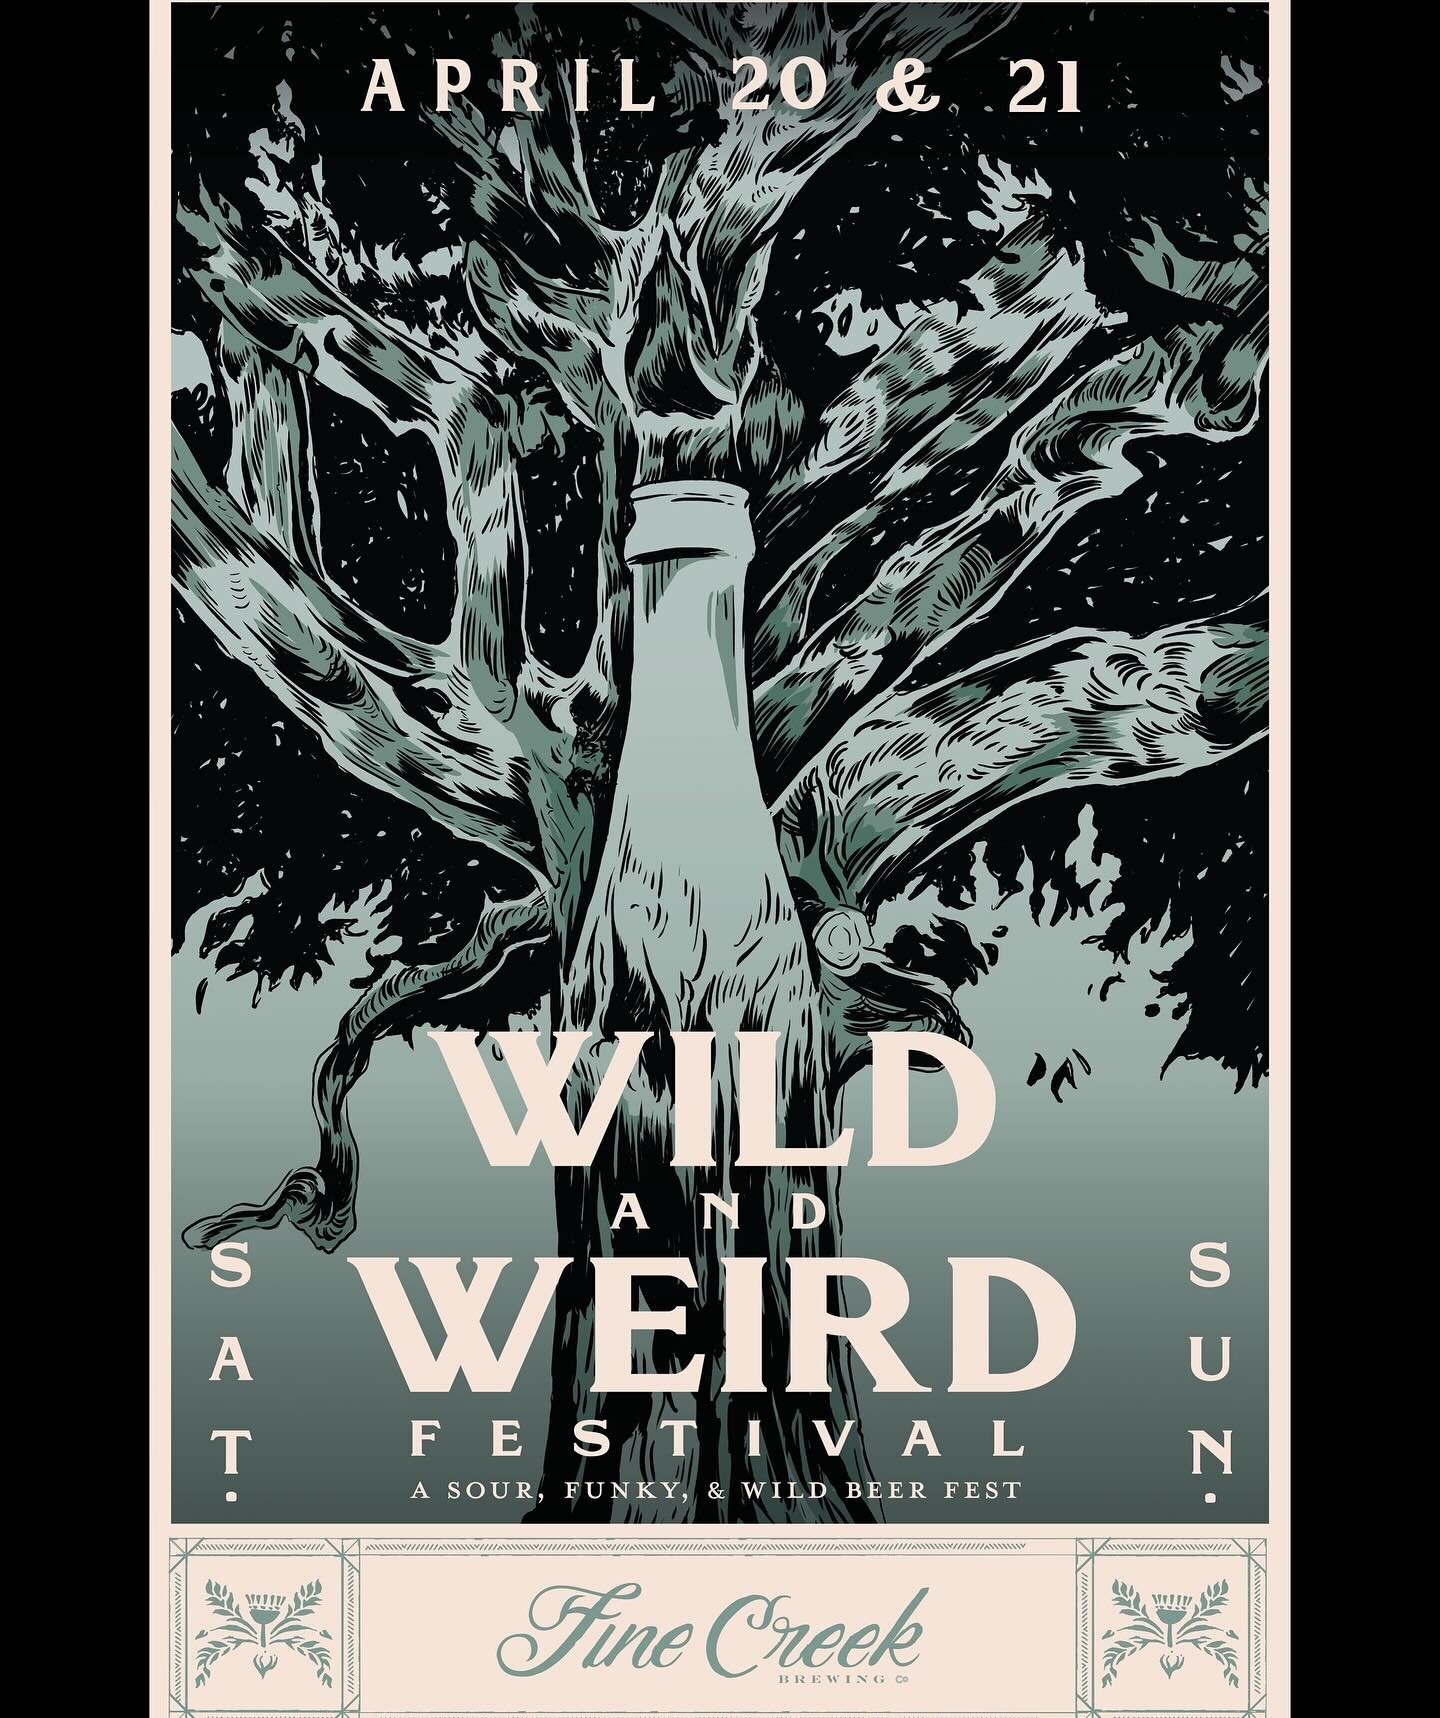 Mieza Blendery is finally starting to leave the cave! 

We are excited to announce we will be pouring at @finecreekbrewing &rsquo;s Wild and Weird Festival 4/20-4/21. 

Come say hi and check out all the other Virginia producers attending.

Cheers